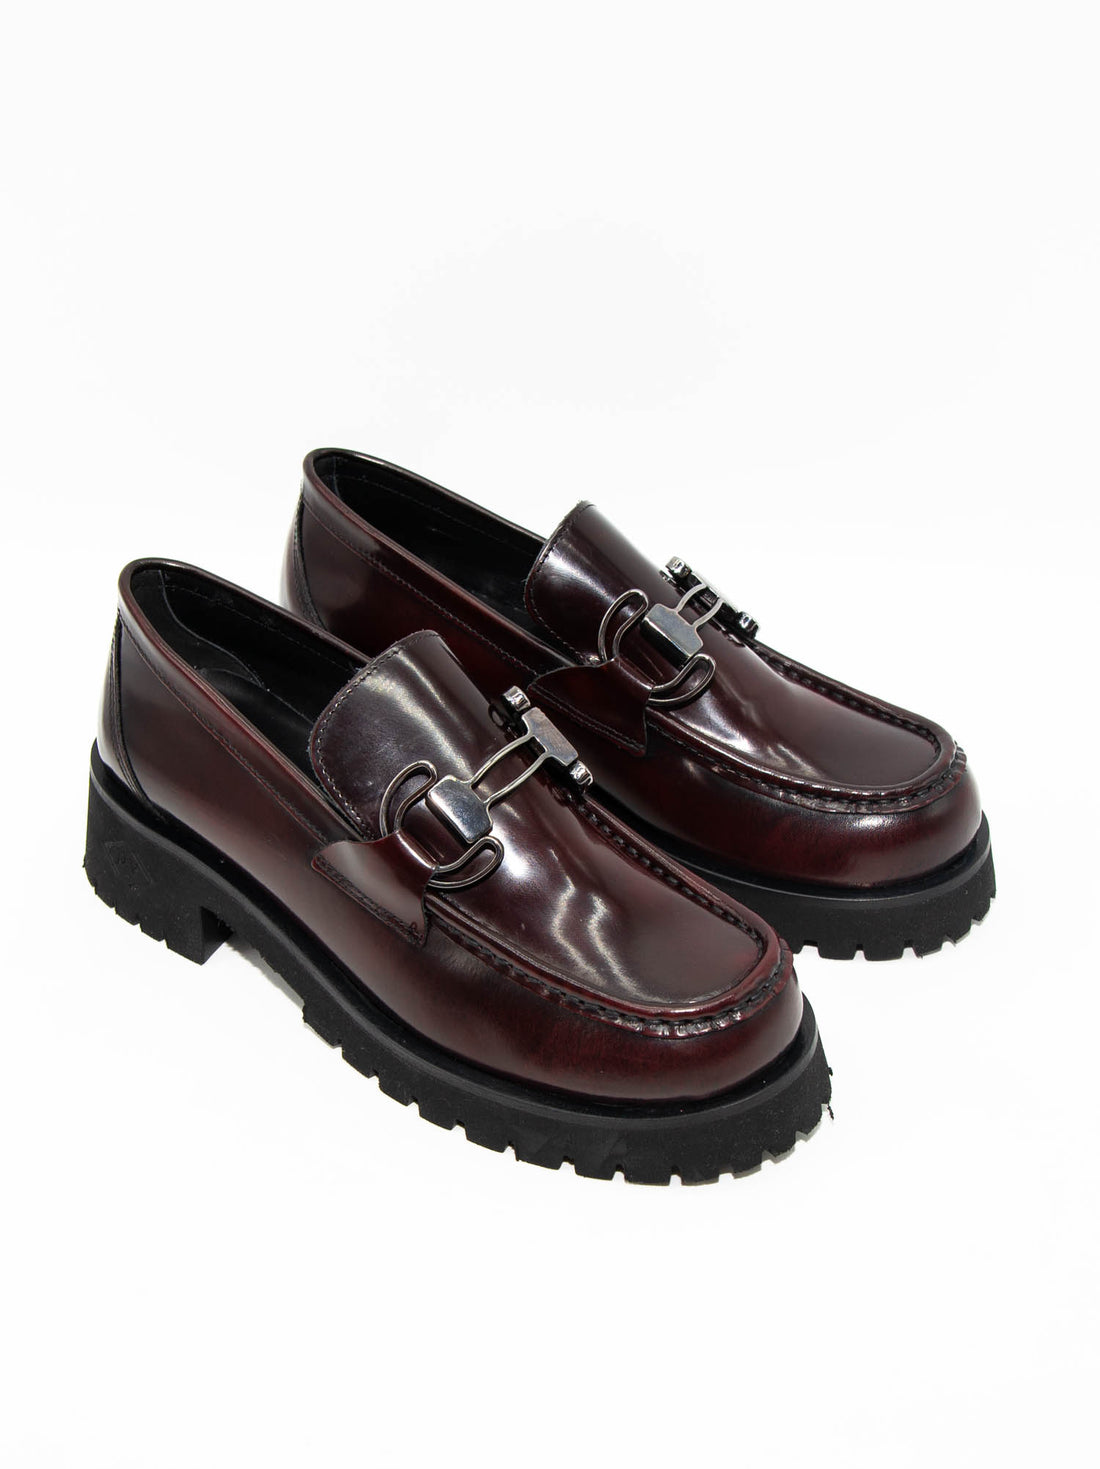 JMC50 BRUSHED LEATHER LOAFERS